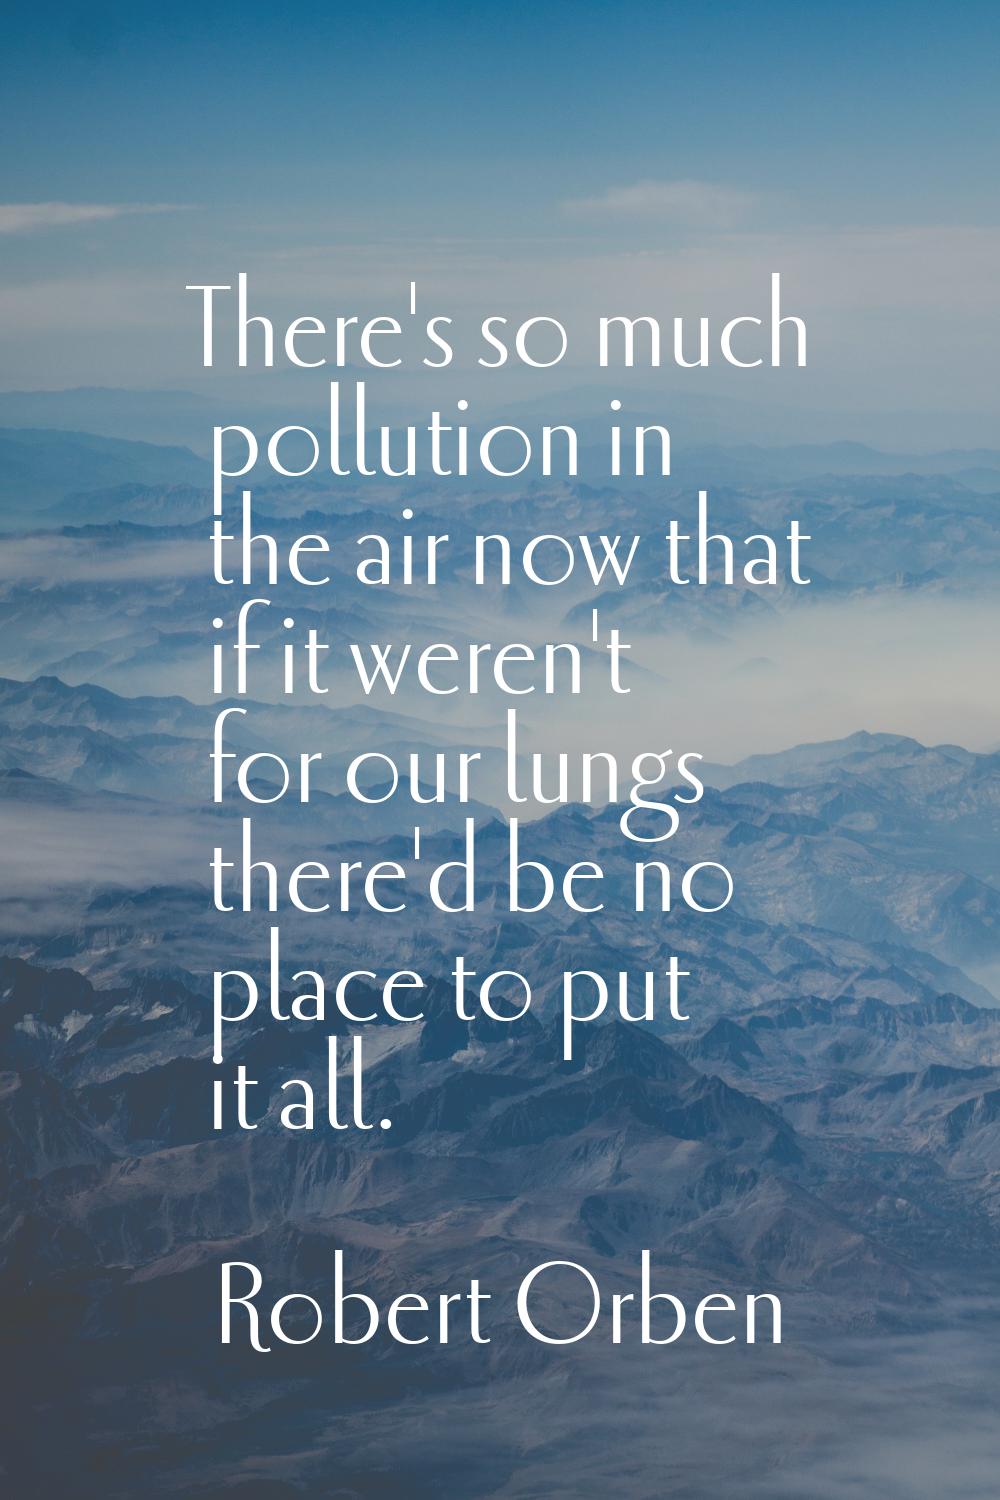 There's so much pollution in the air now that if it weren't for our lungs there'd be no place to pu